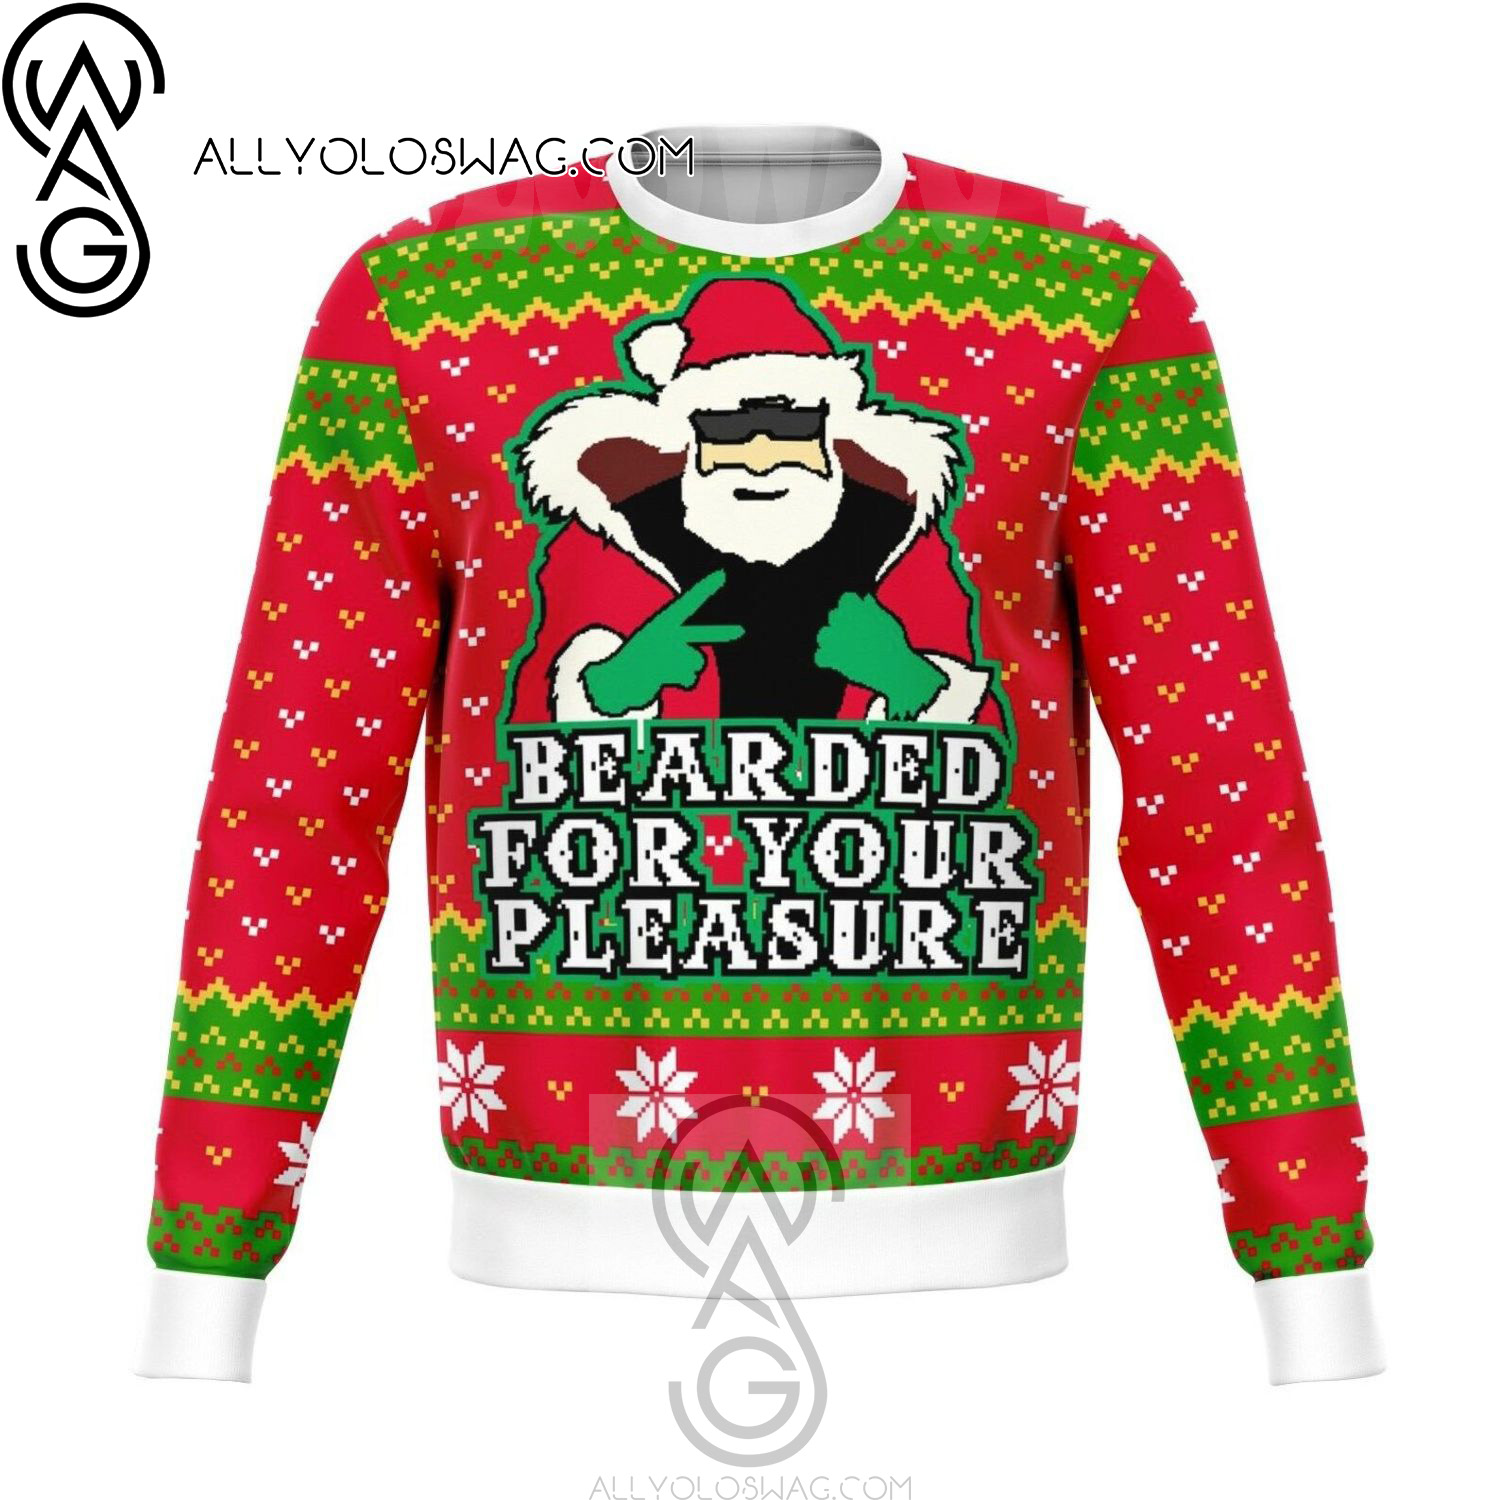 Beard For Your Pleasure Holiday Party Ugly Christmas Sweater